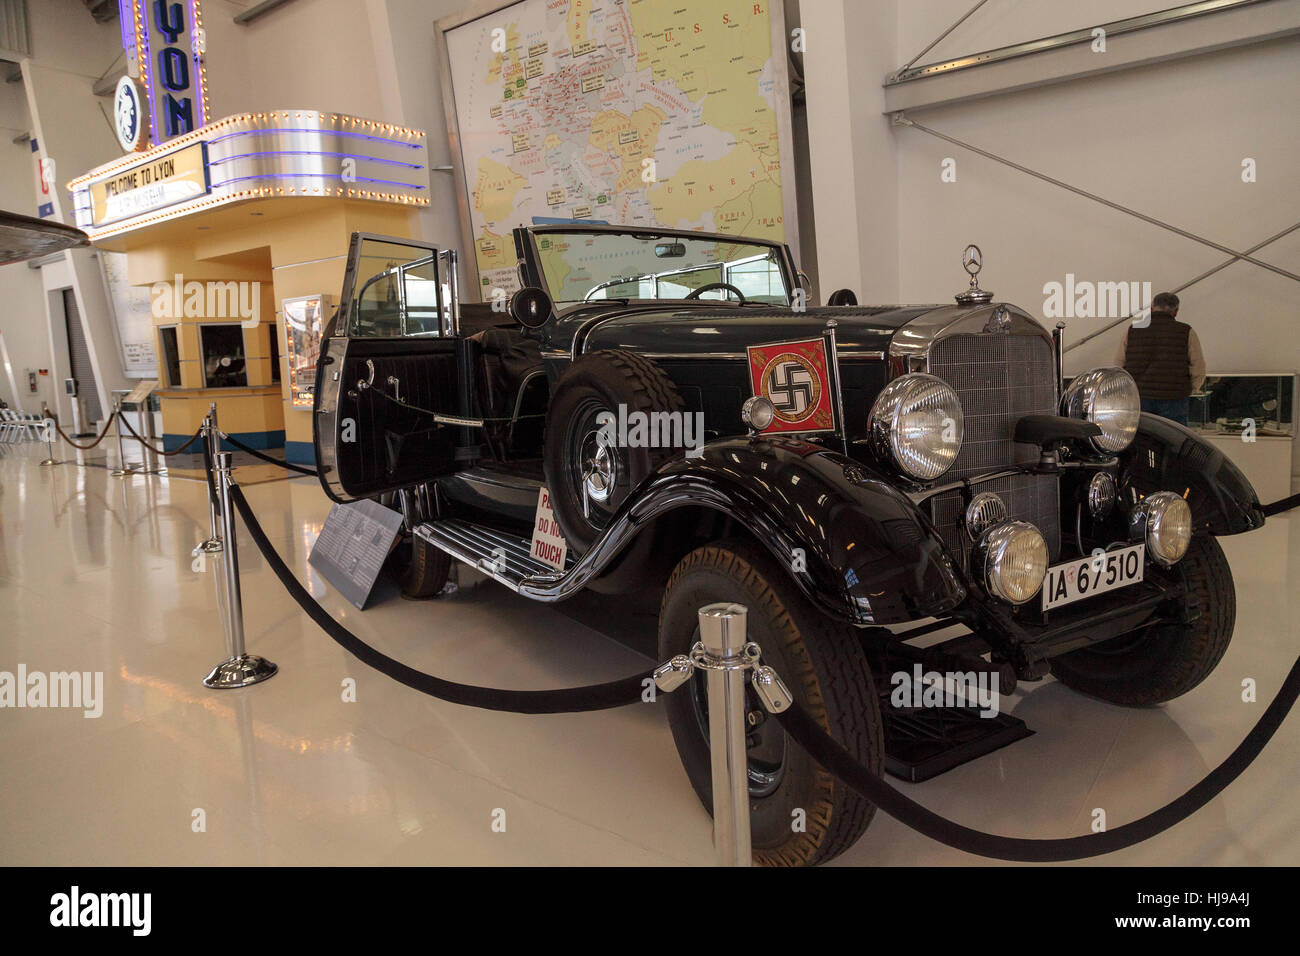 Old 1939 Mercedes-Benz Model G4 Offener Touring Wagon that once belonged to Adolph Hitler displayed at the Lyon Air Museum Stock Photo